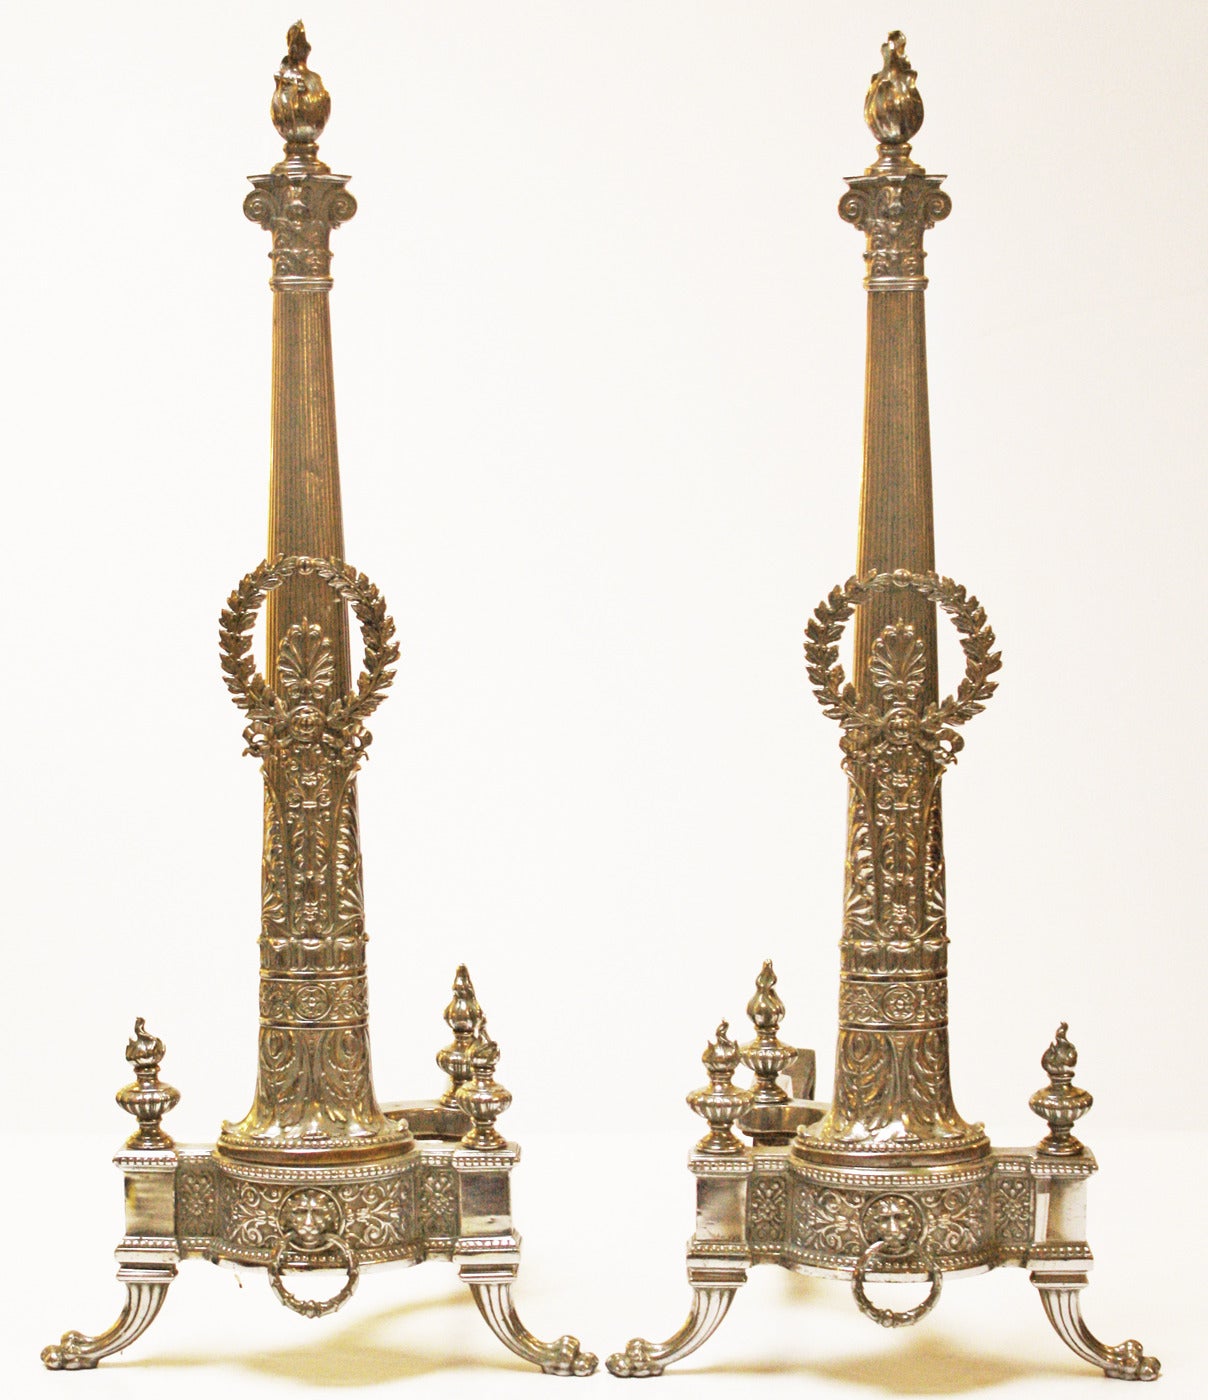 Regency inspired silvered metal andirons with flames, finials, paw feet and laurel wreaths.